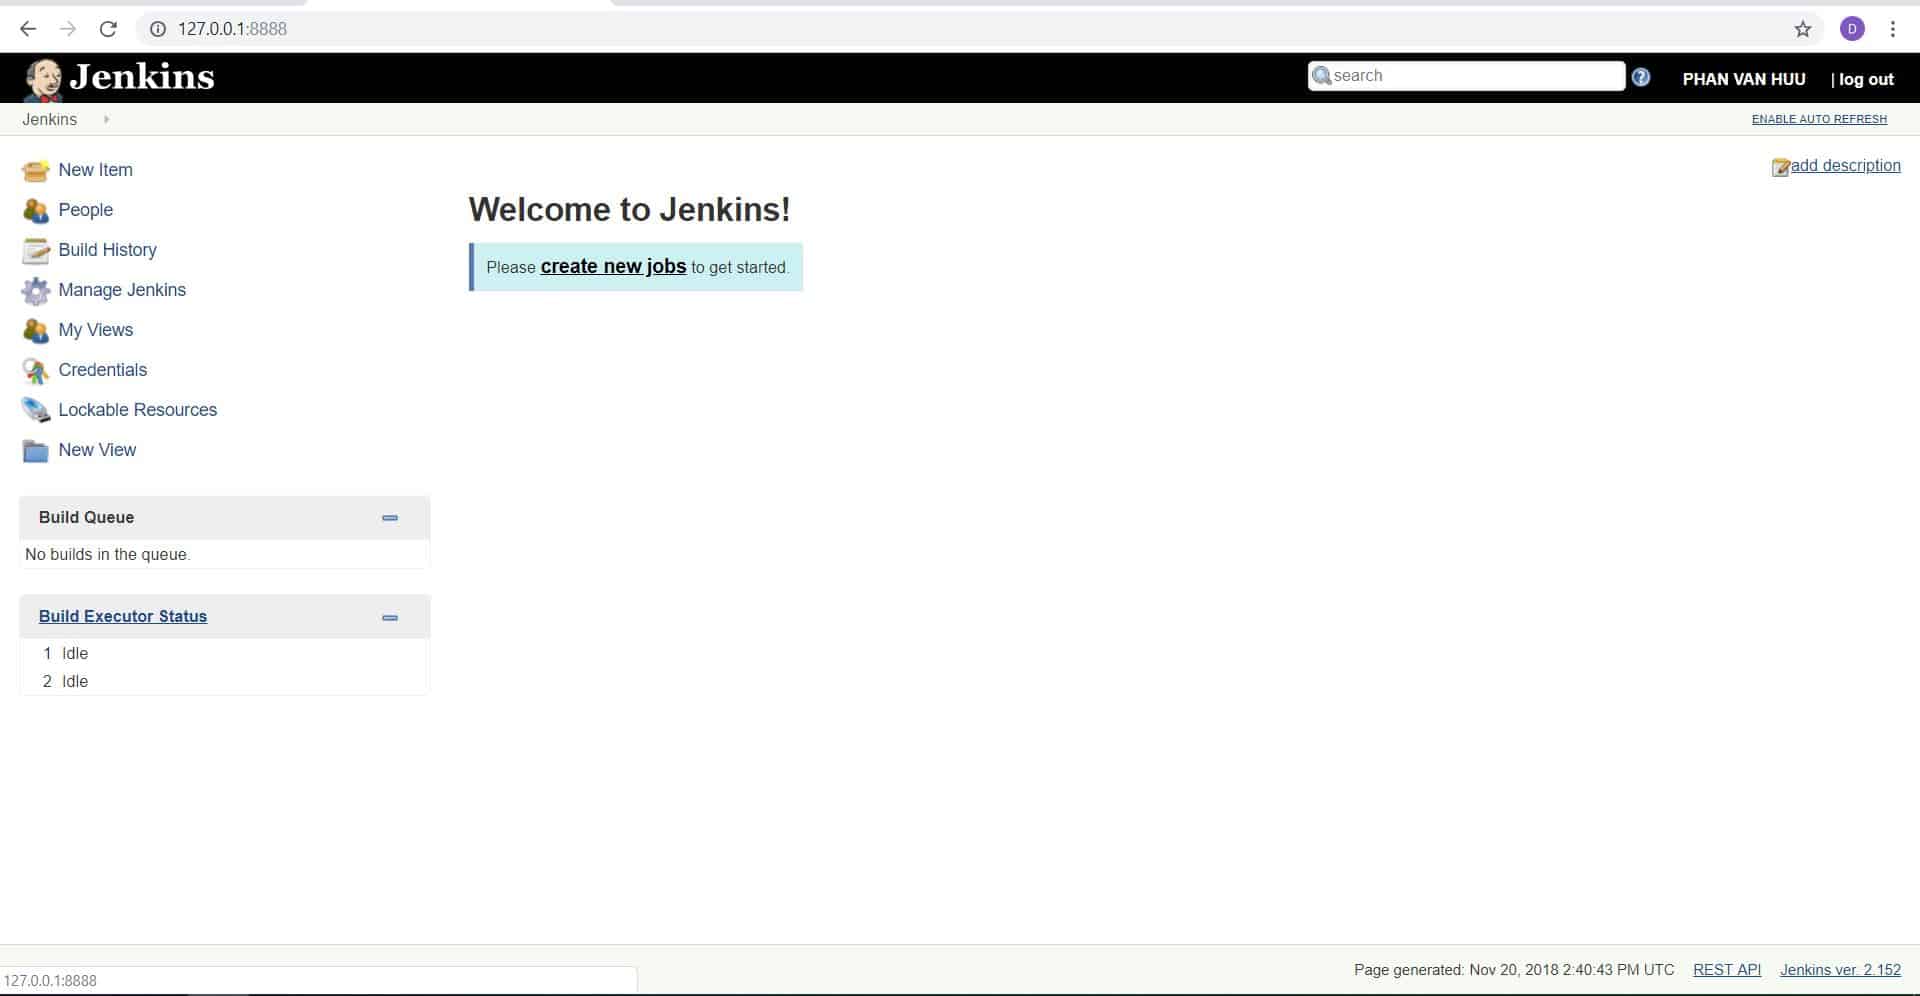 How to install jenkins using vagrant windows10